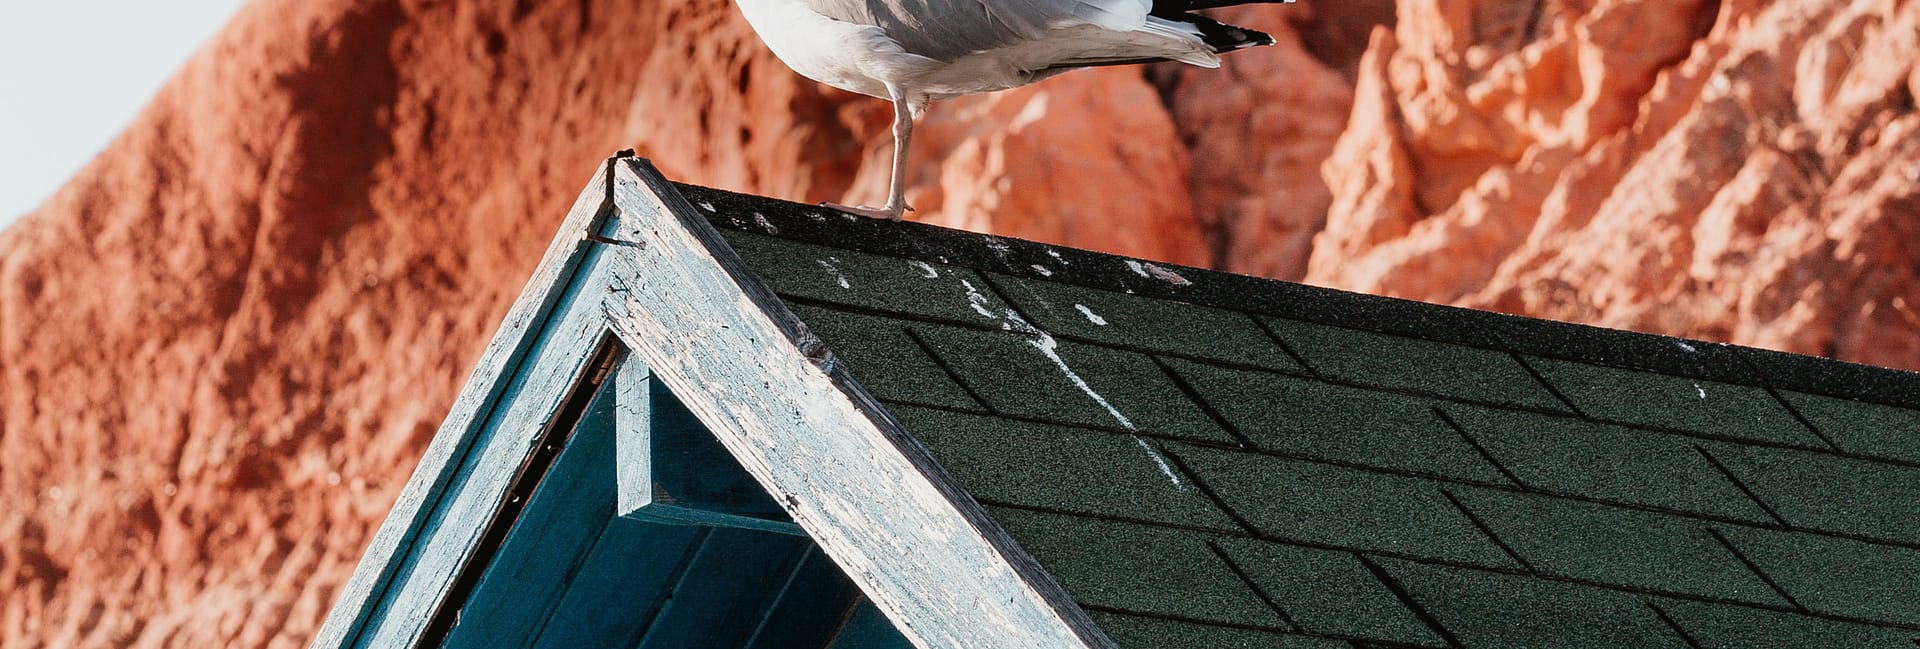 seagull on roof